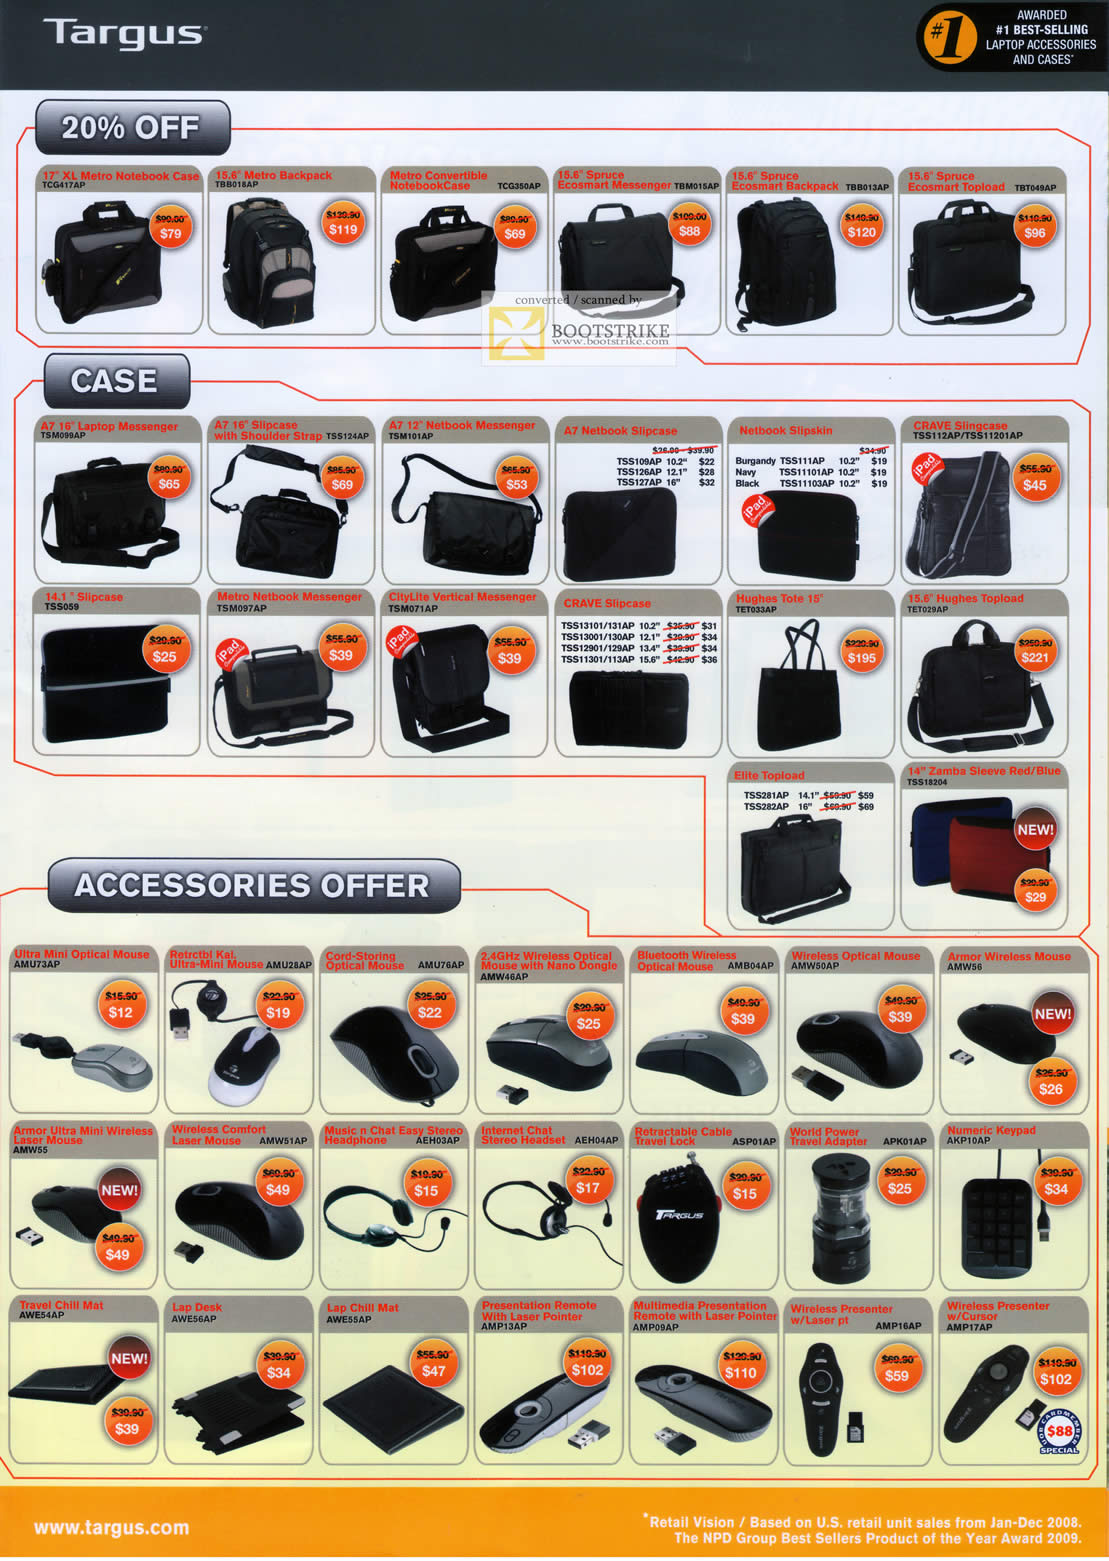 PC Show 2011 price list image brochure of Targus Notebook Case Metro Backpack Spruce Ecosmart Messenger Slipcase Crave Mouse Accessories Headset Keyboard Travel Adapter Laser Pointer